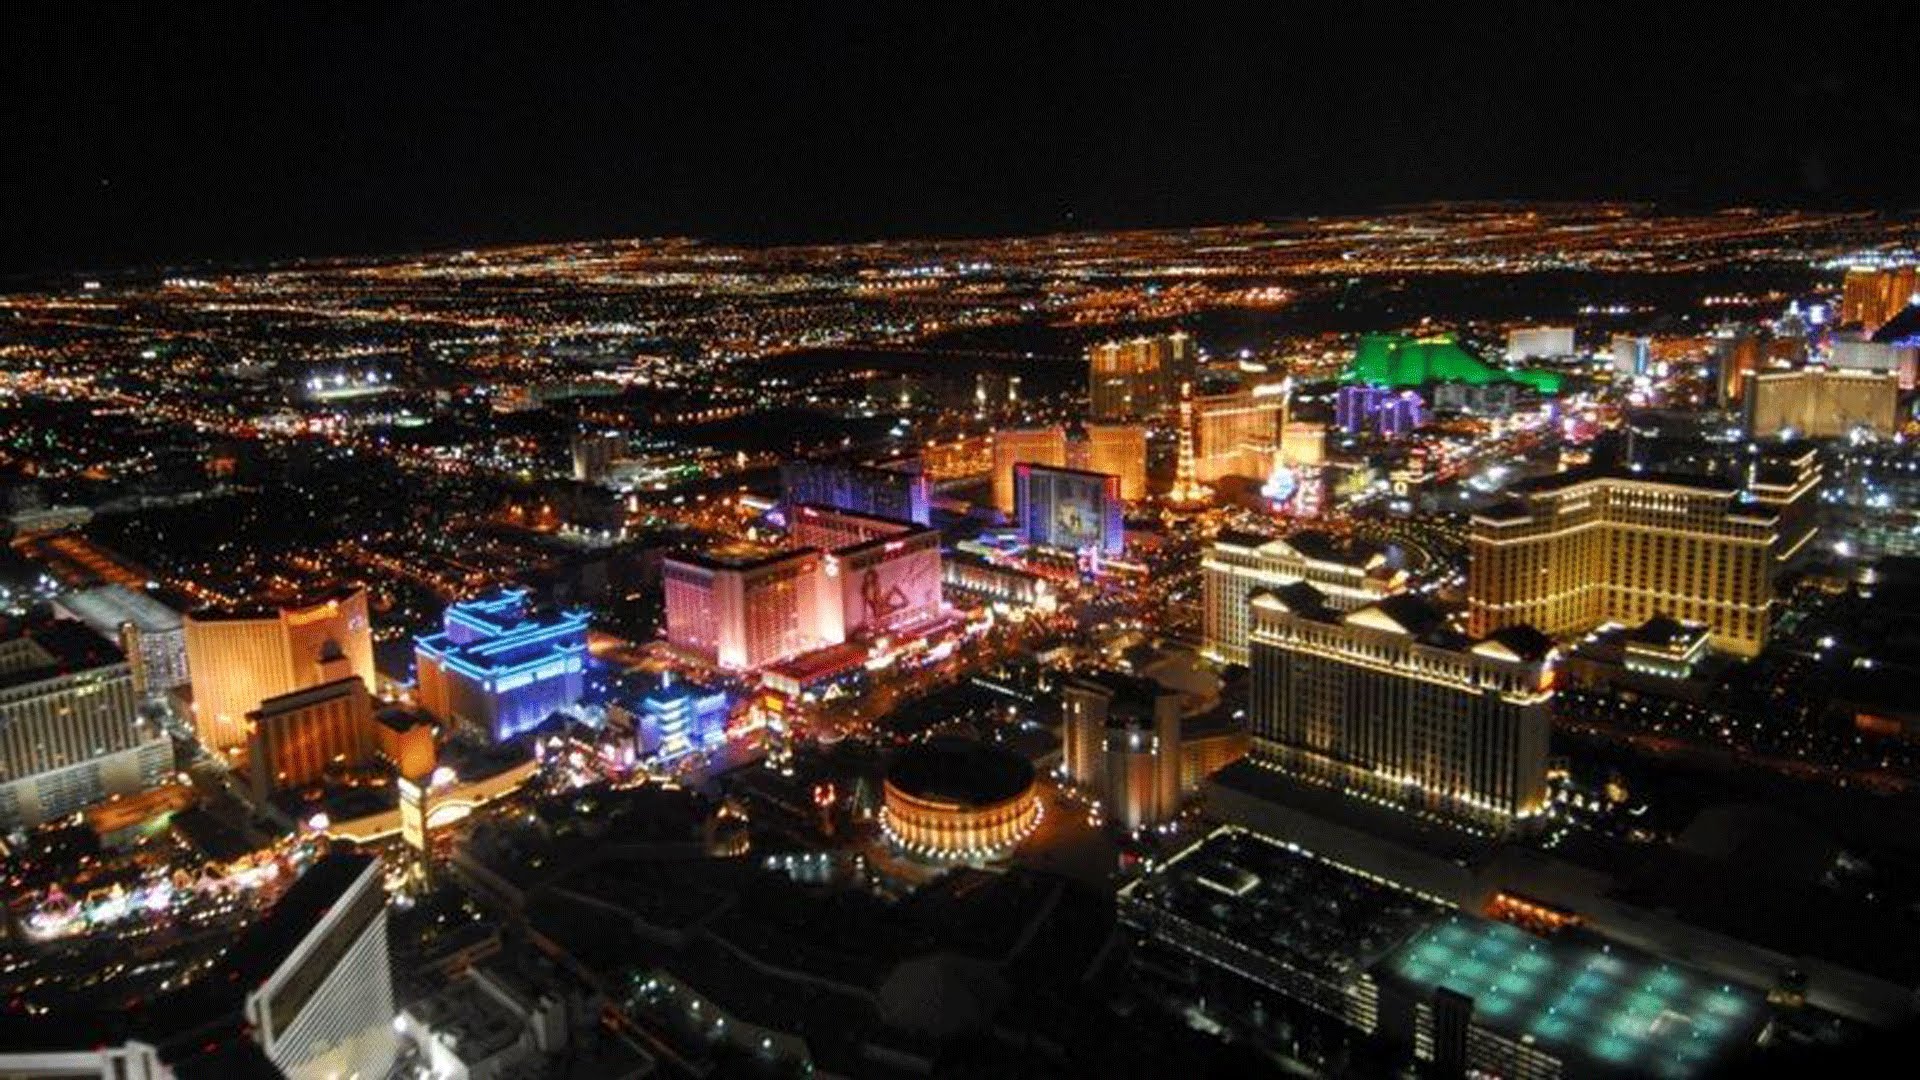 Las Vegas City Lights Helicopter Tour - YouTube